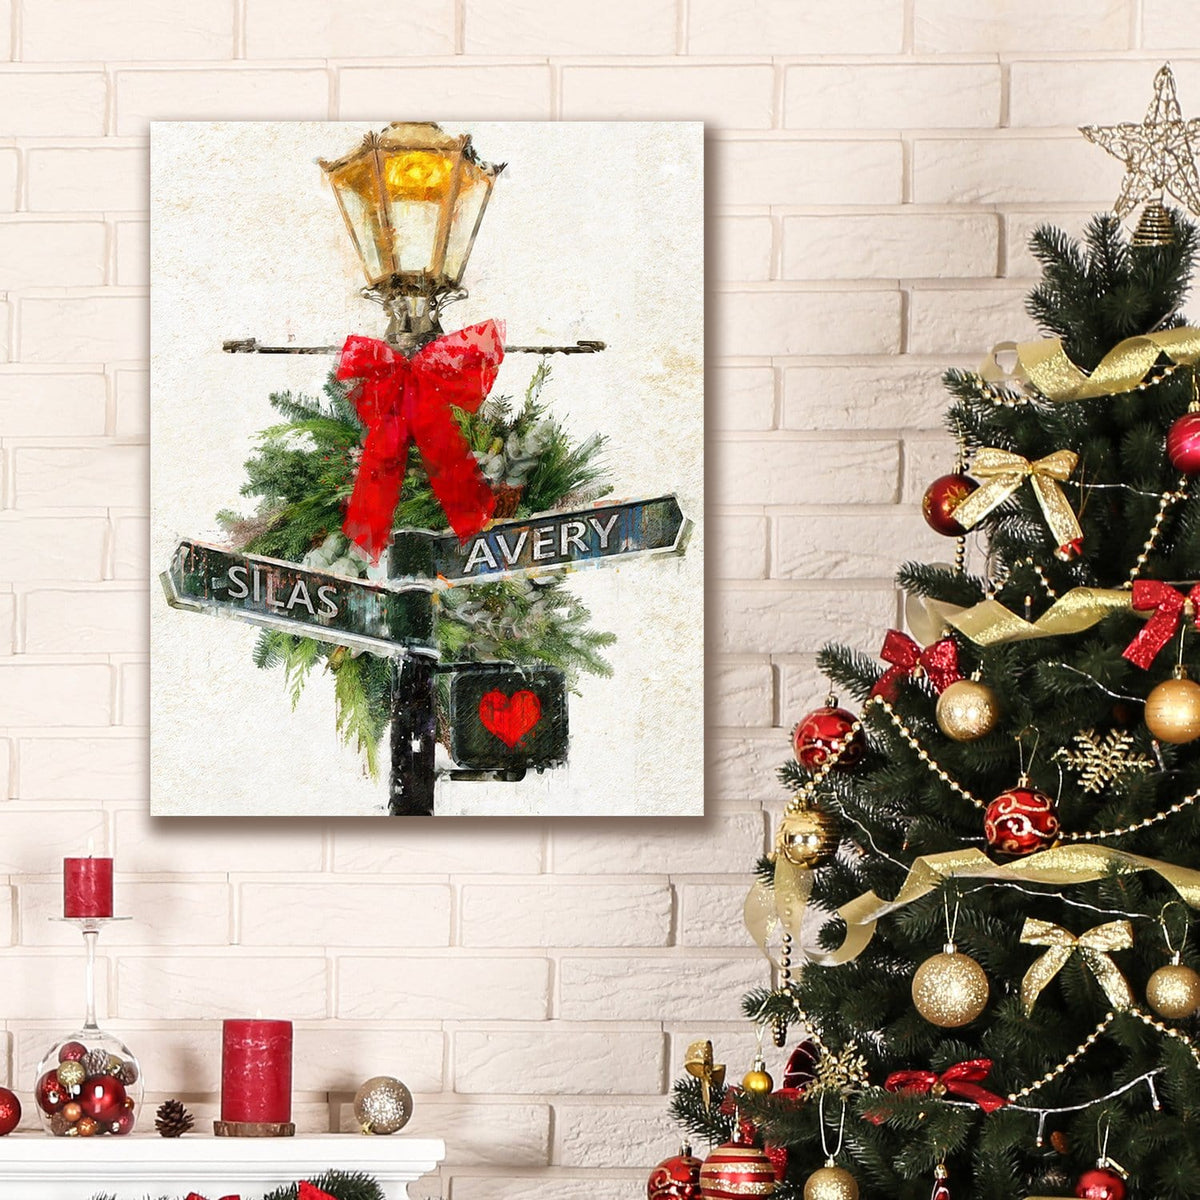 romantic Christmas decor - Personalized gifts from Personal Prints